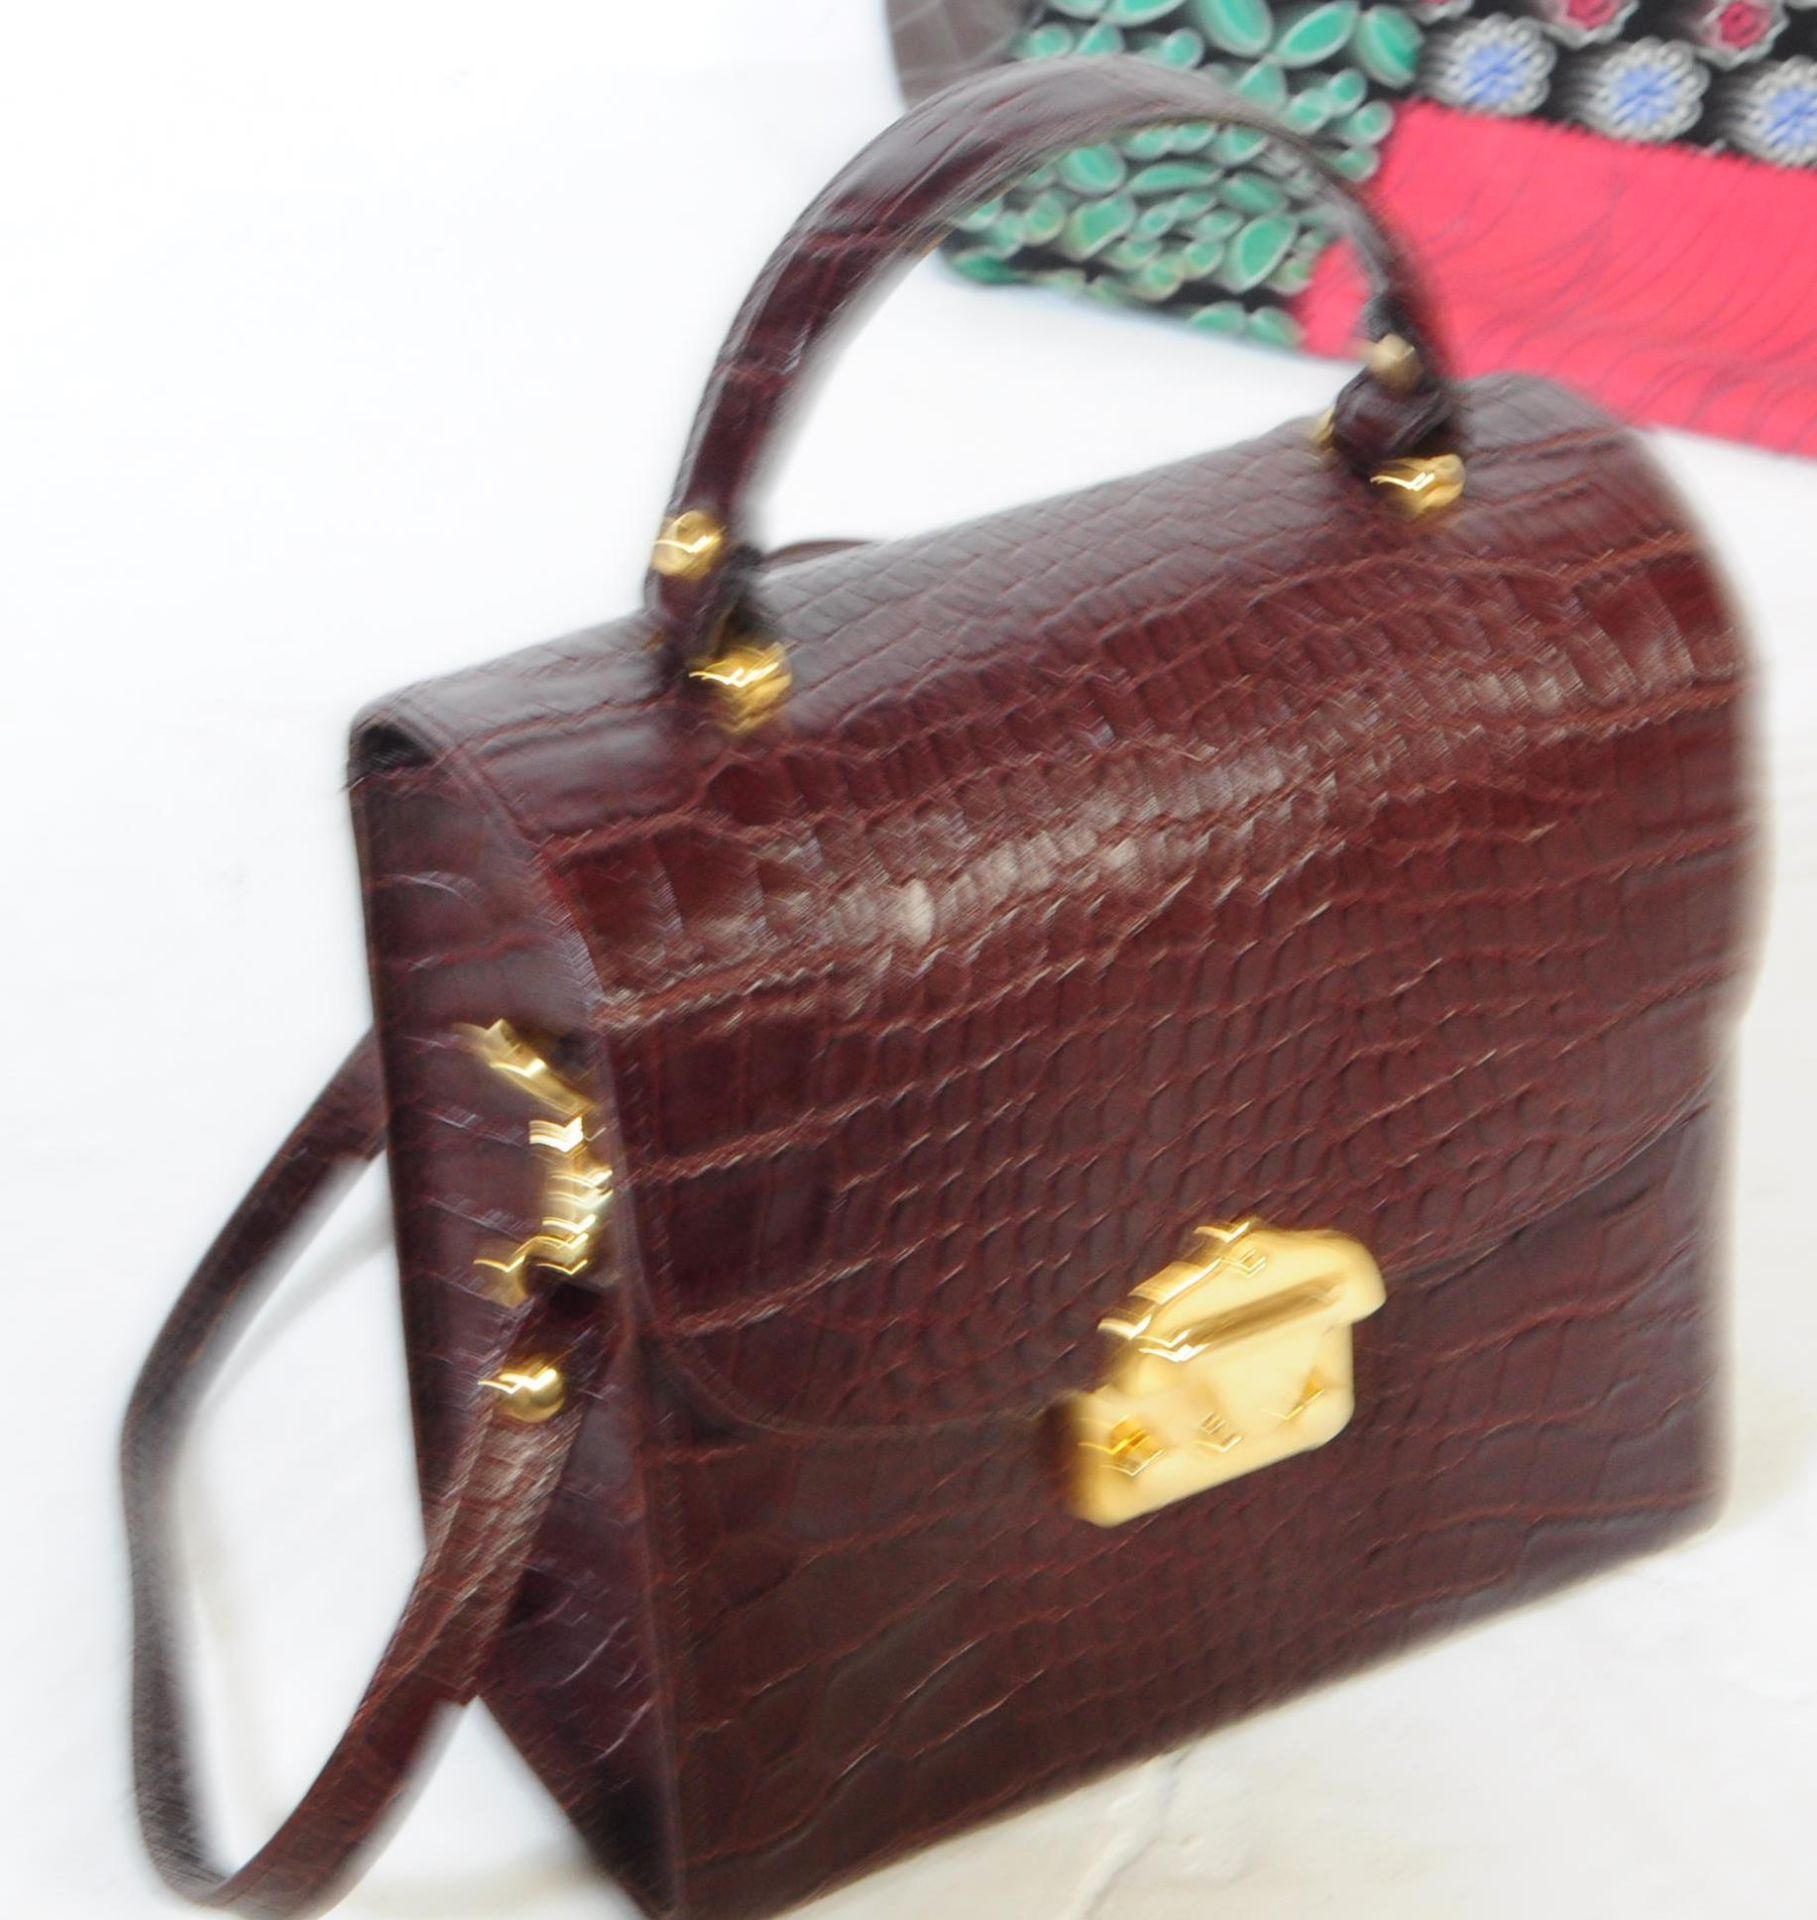 COLLECTION OF VINTAGE 20TH CENTURY HANDBAGS - Image 7 of 8